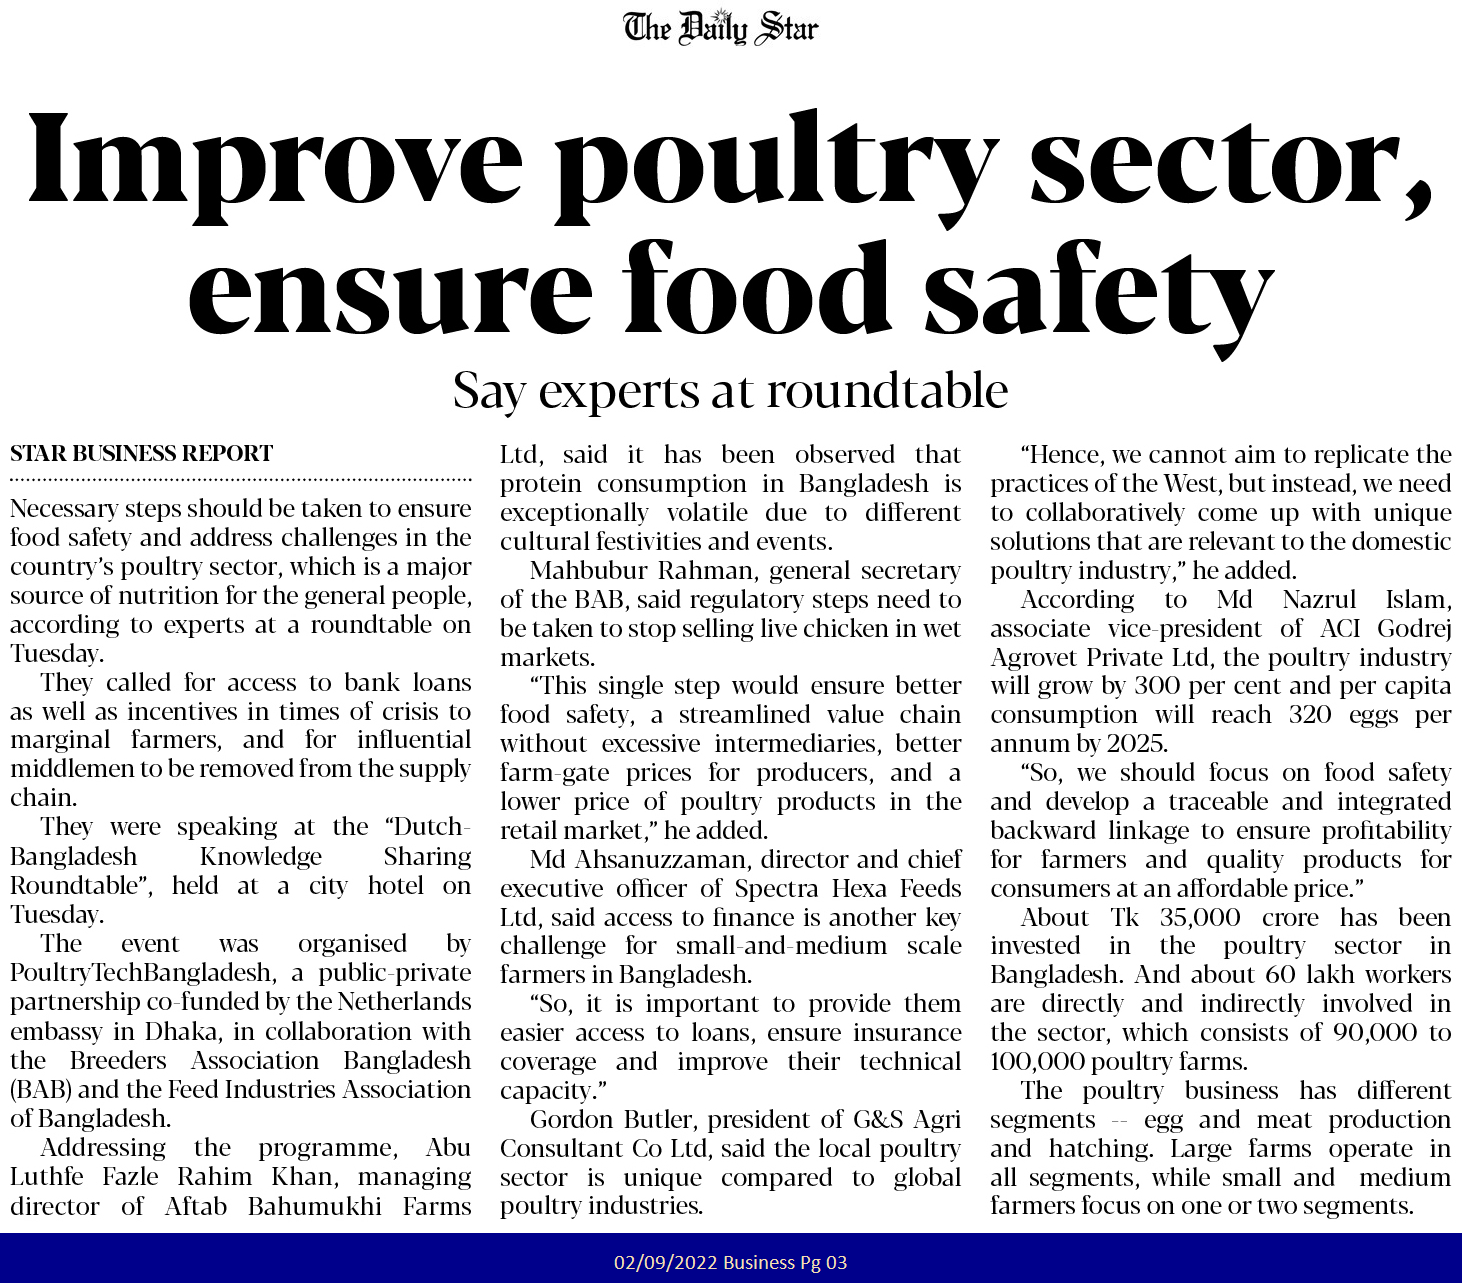 Improve Poultry Sector, Ensure Food Safety